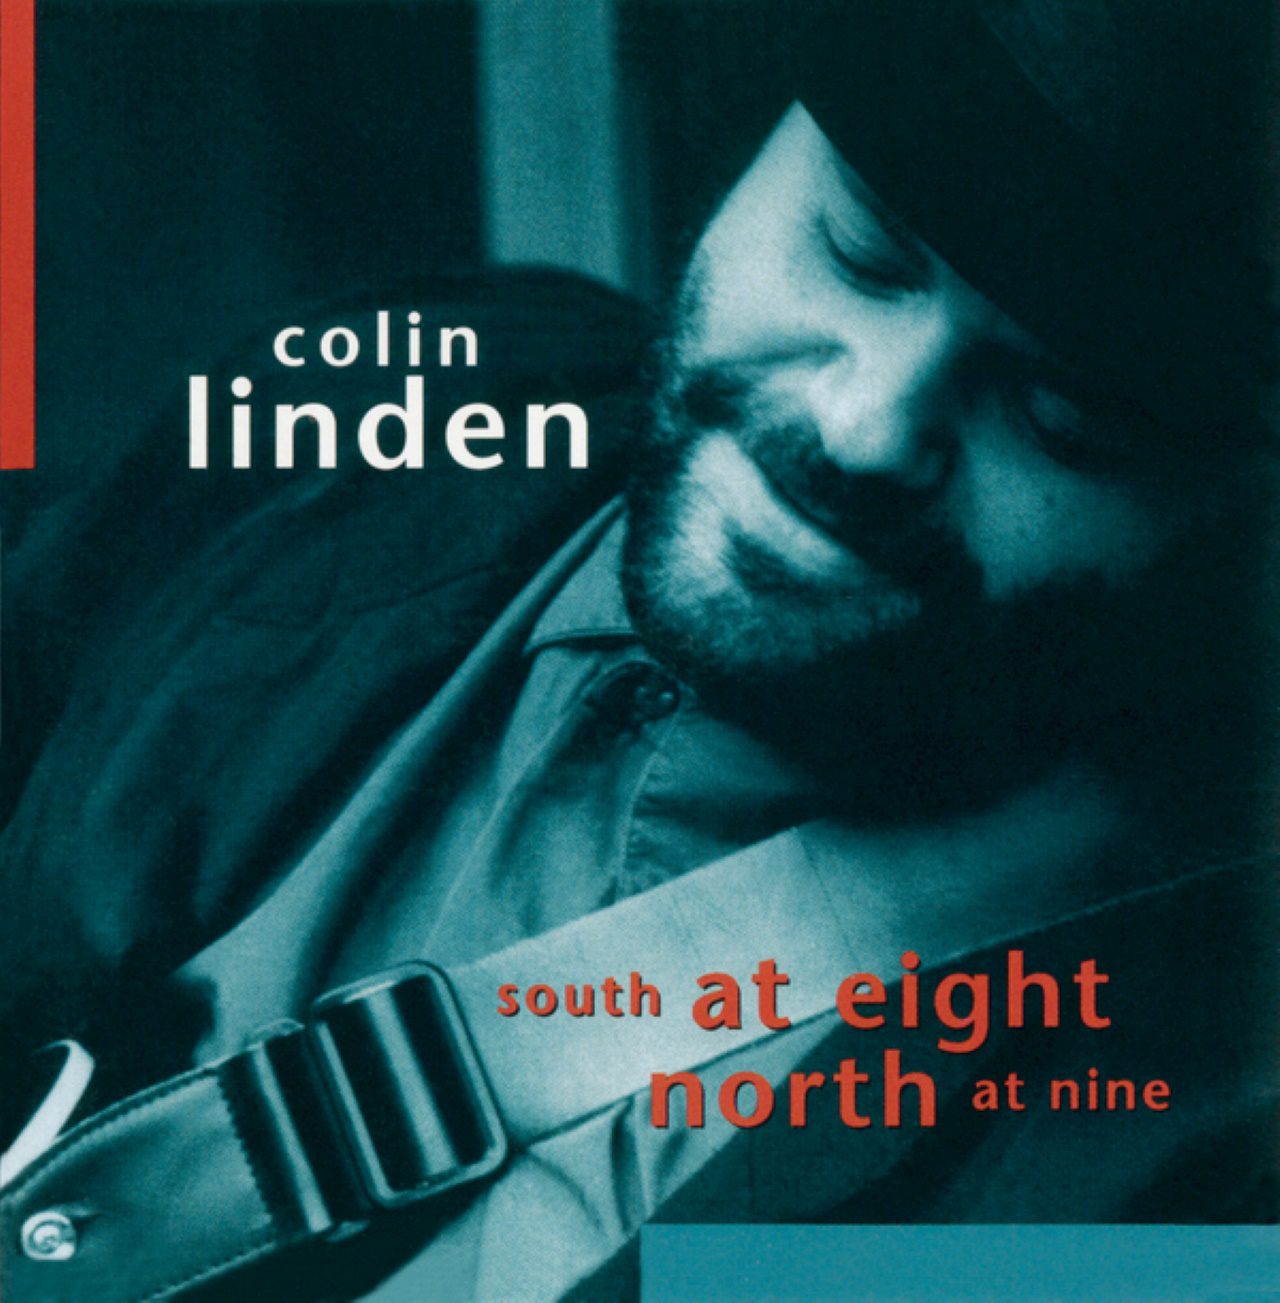 Colin Linden – South At Eight North At Nine cover album